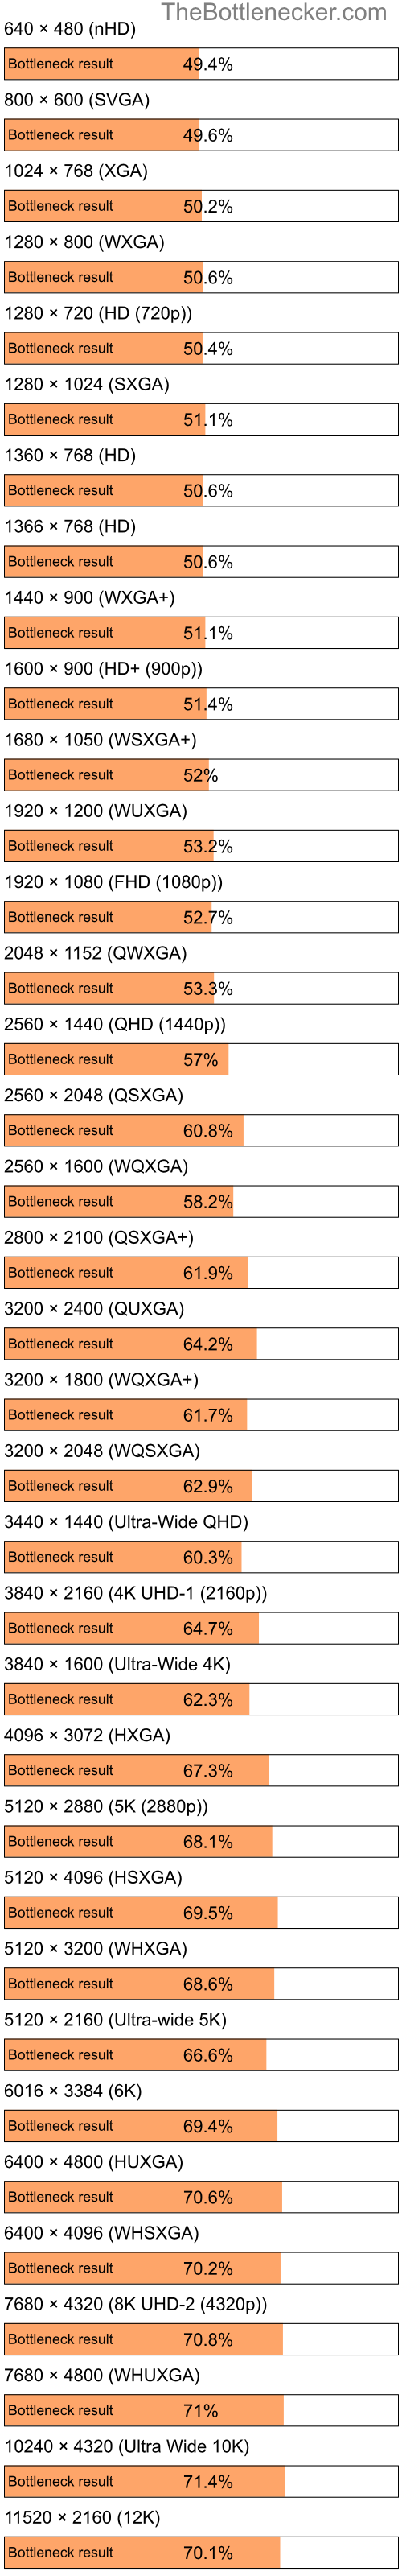 Bottleneck results by resolution for Intel Pentium 4 and AMD Mobility Radeon HD 3430 in Processor Intense Tasks